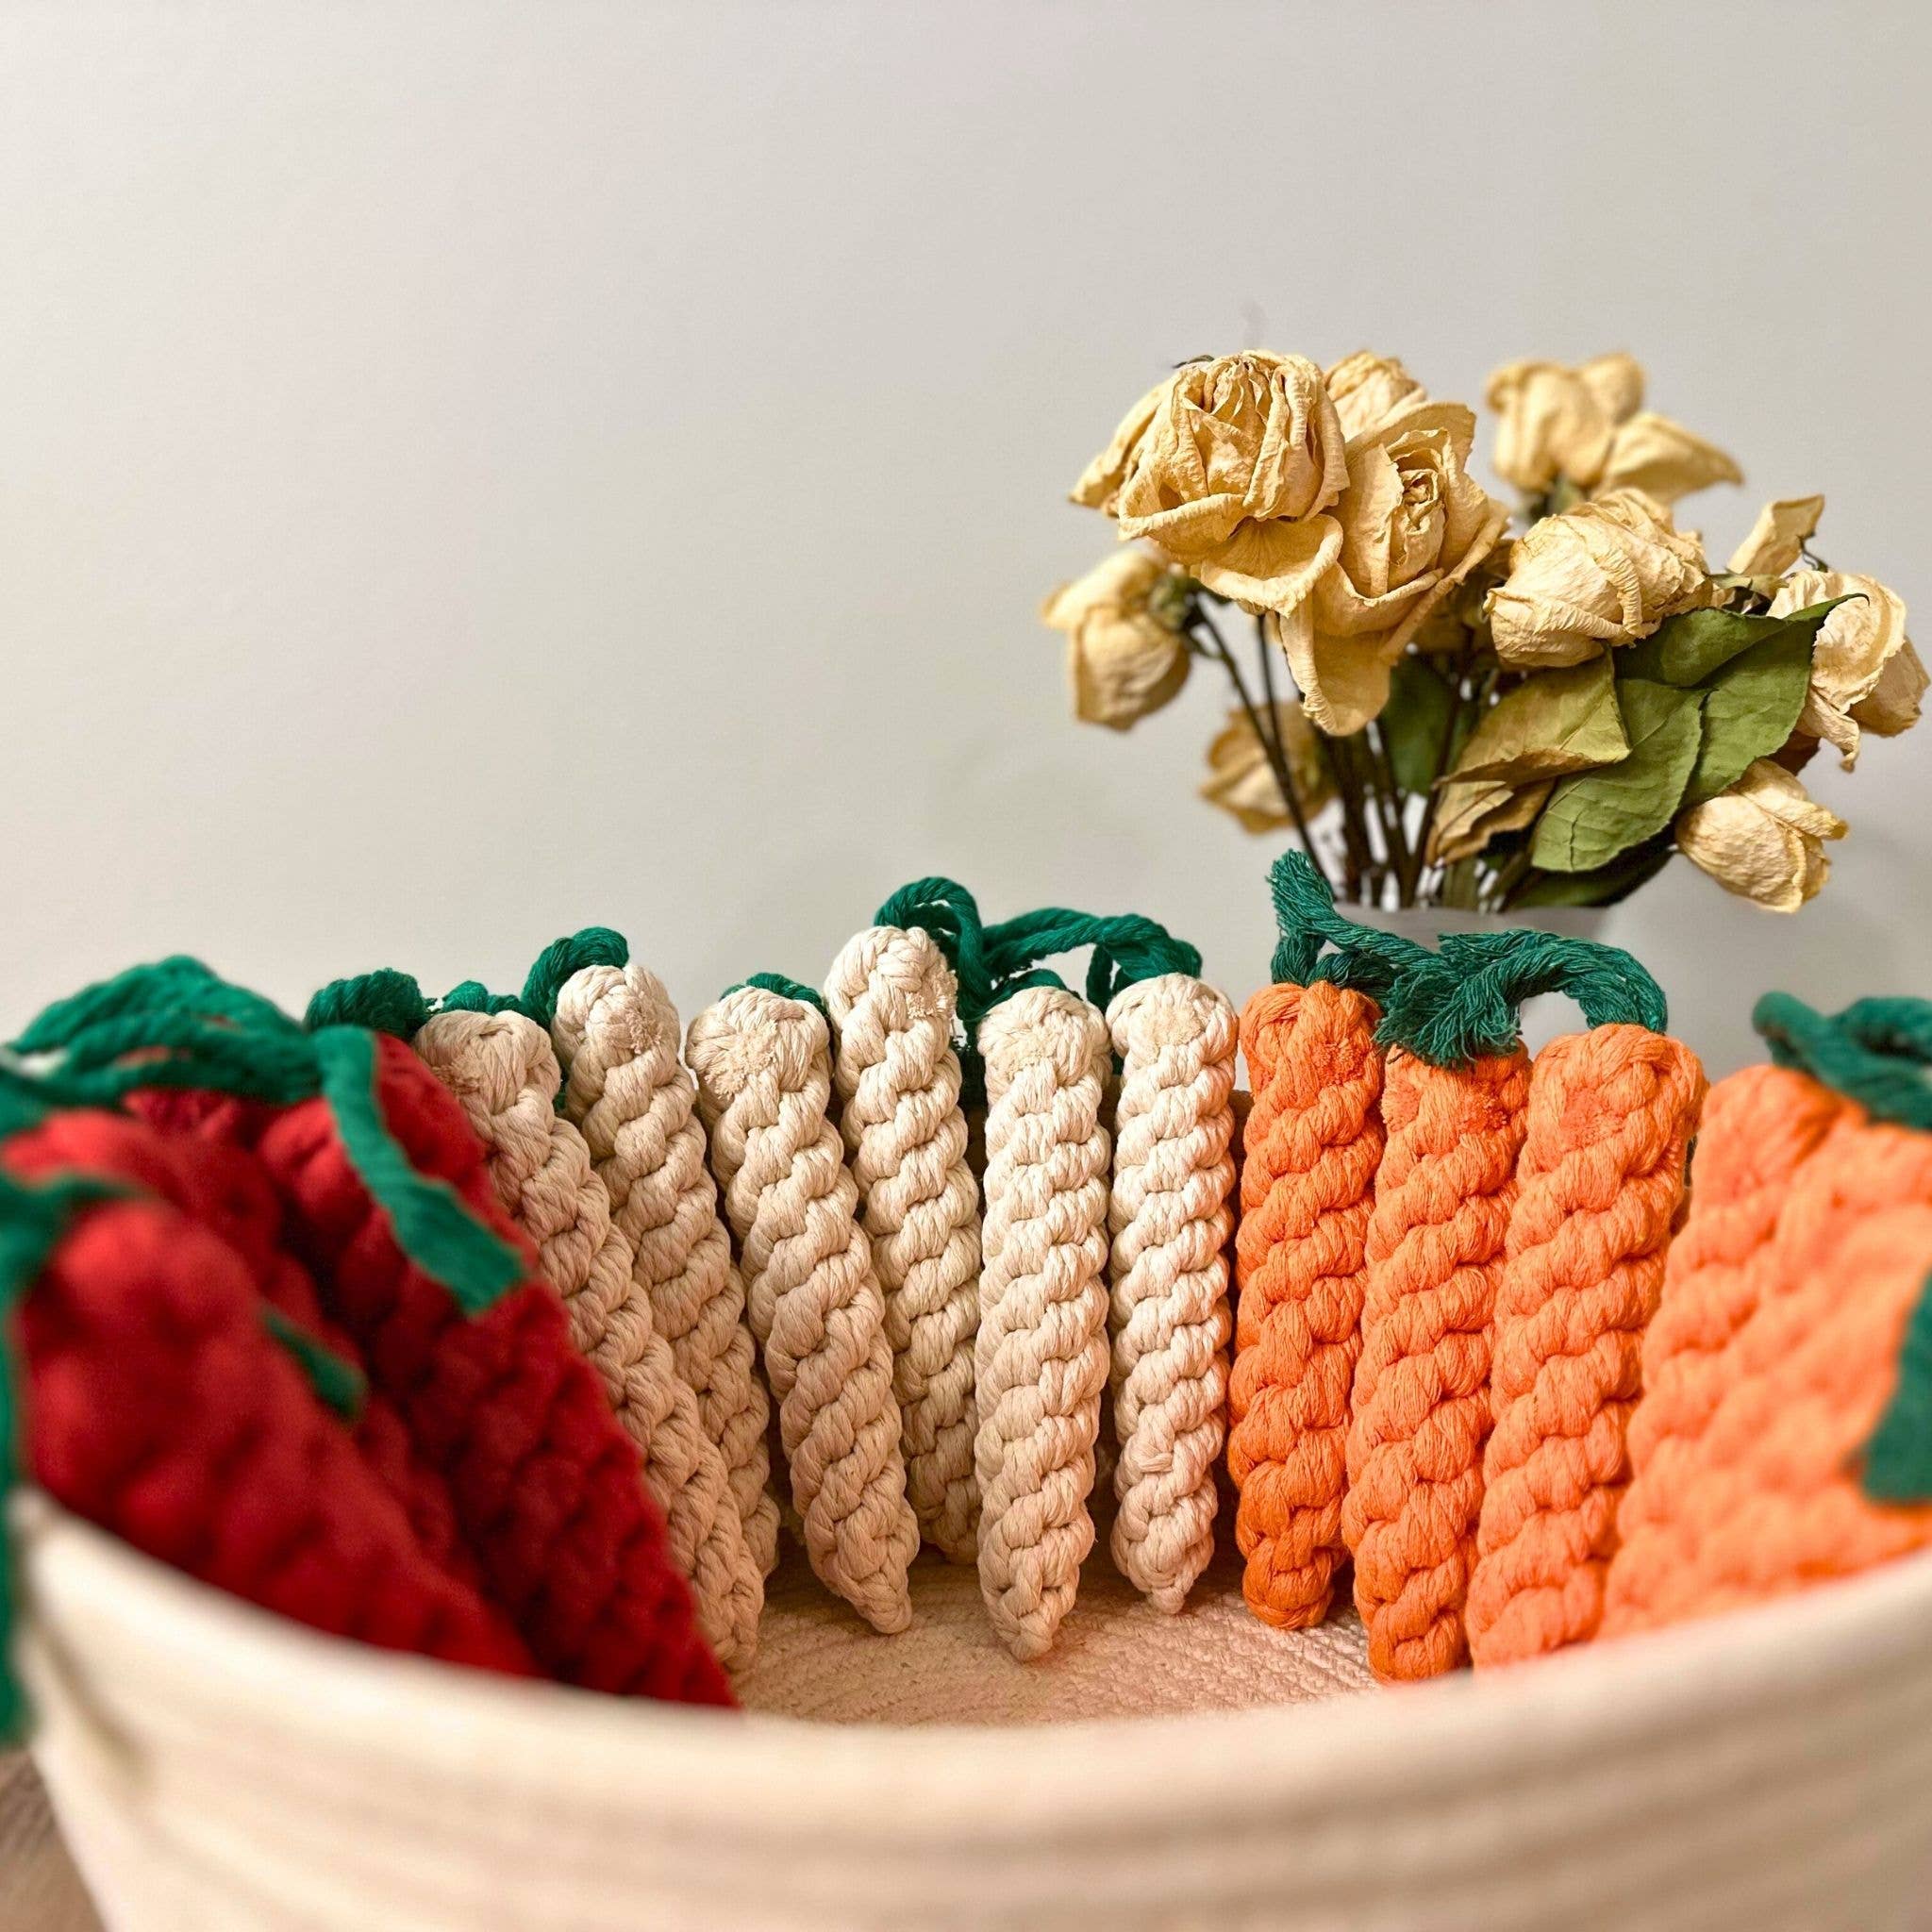 CSCORD International LLC - Handmade Sustainable Carrot Rope Chew Toys for Puppies